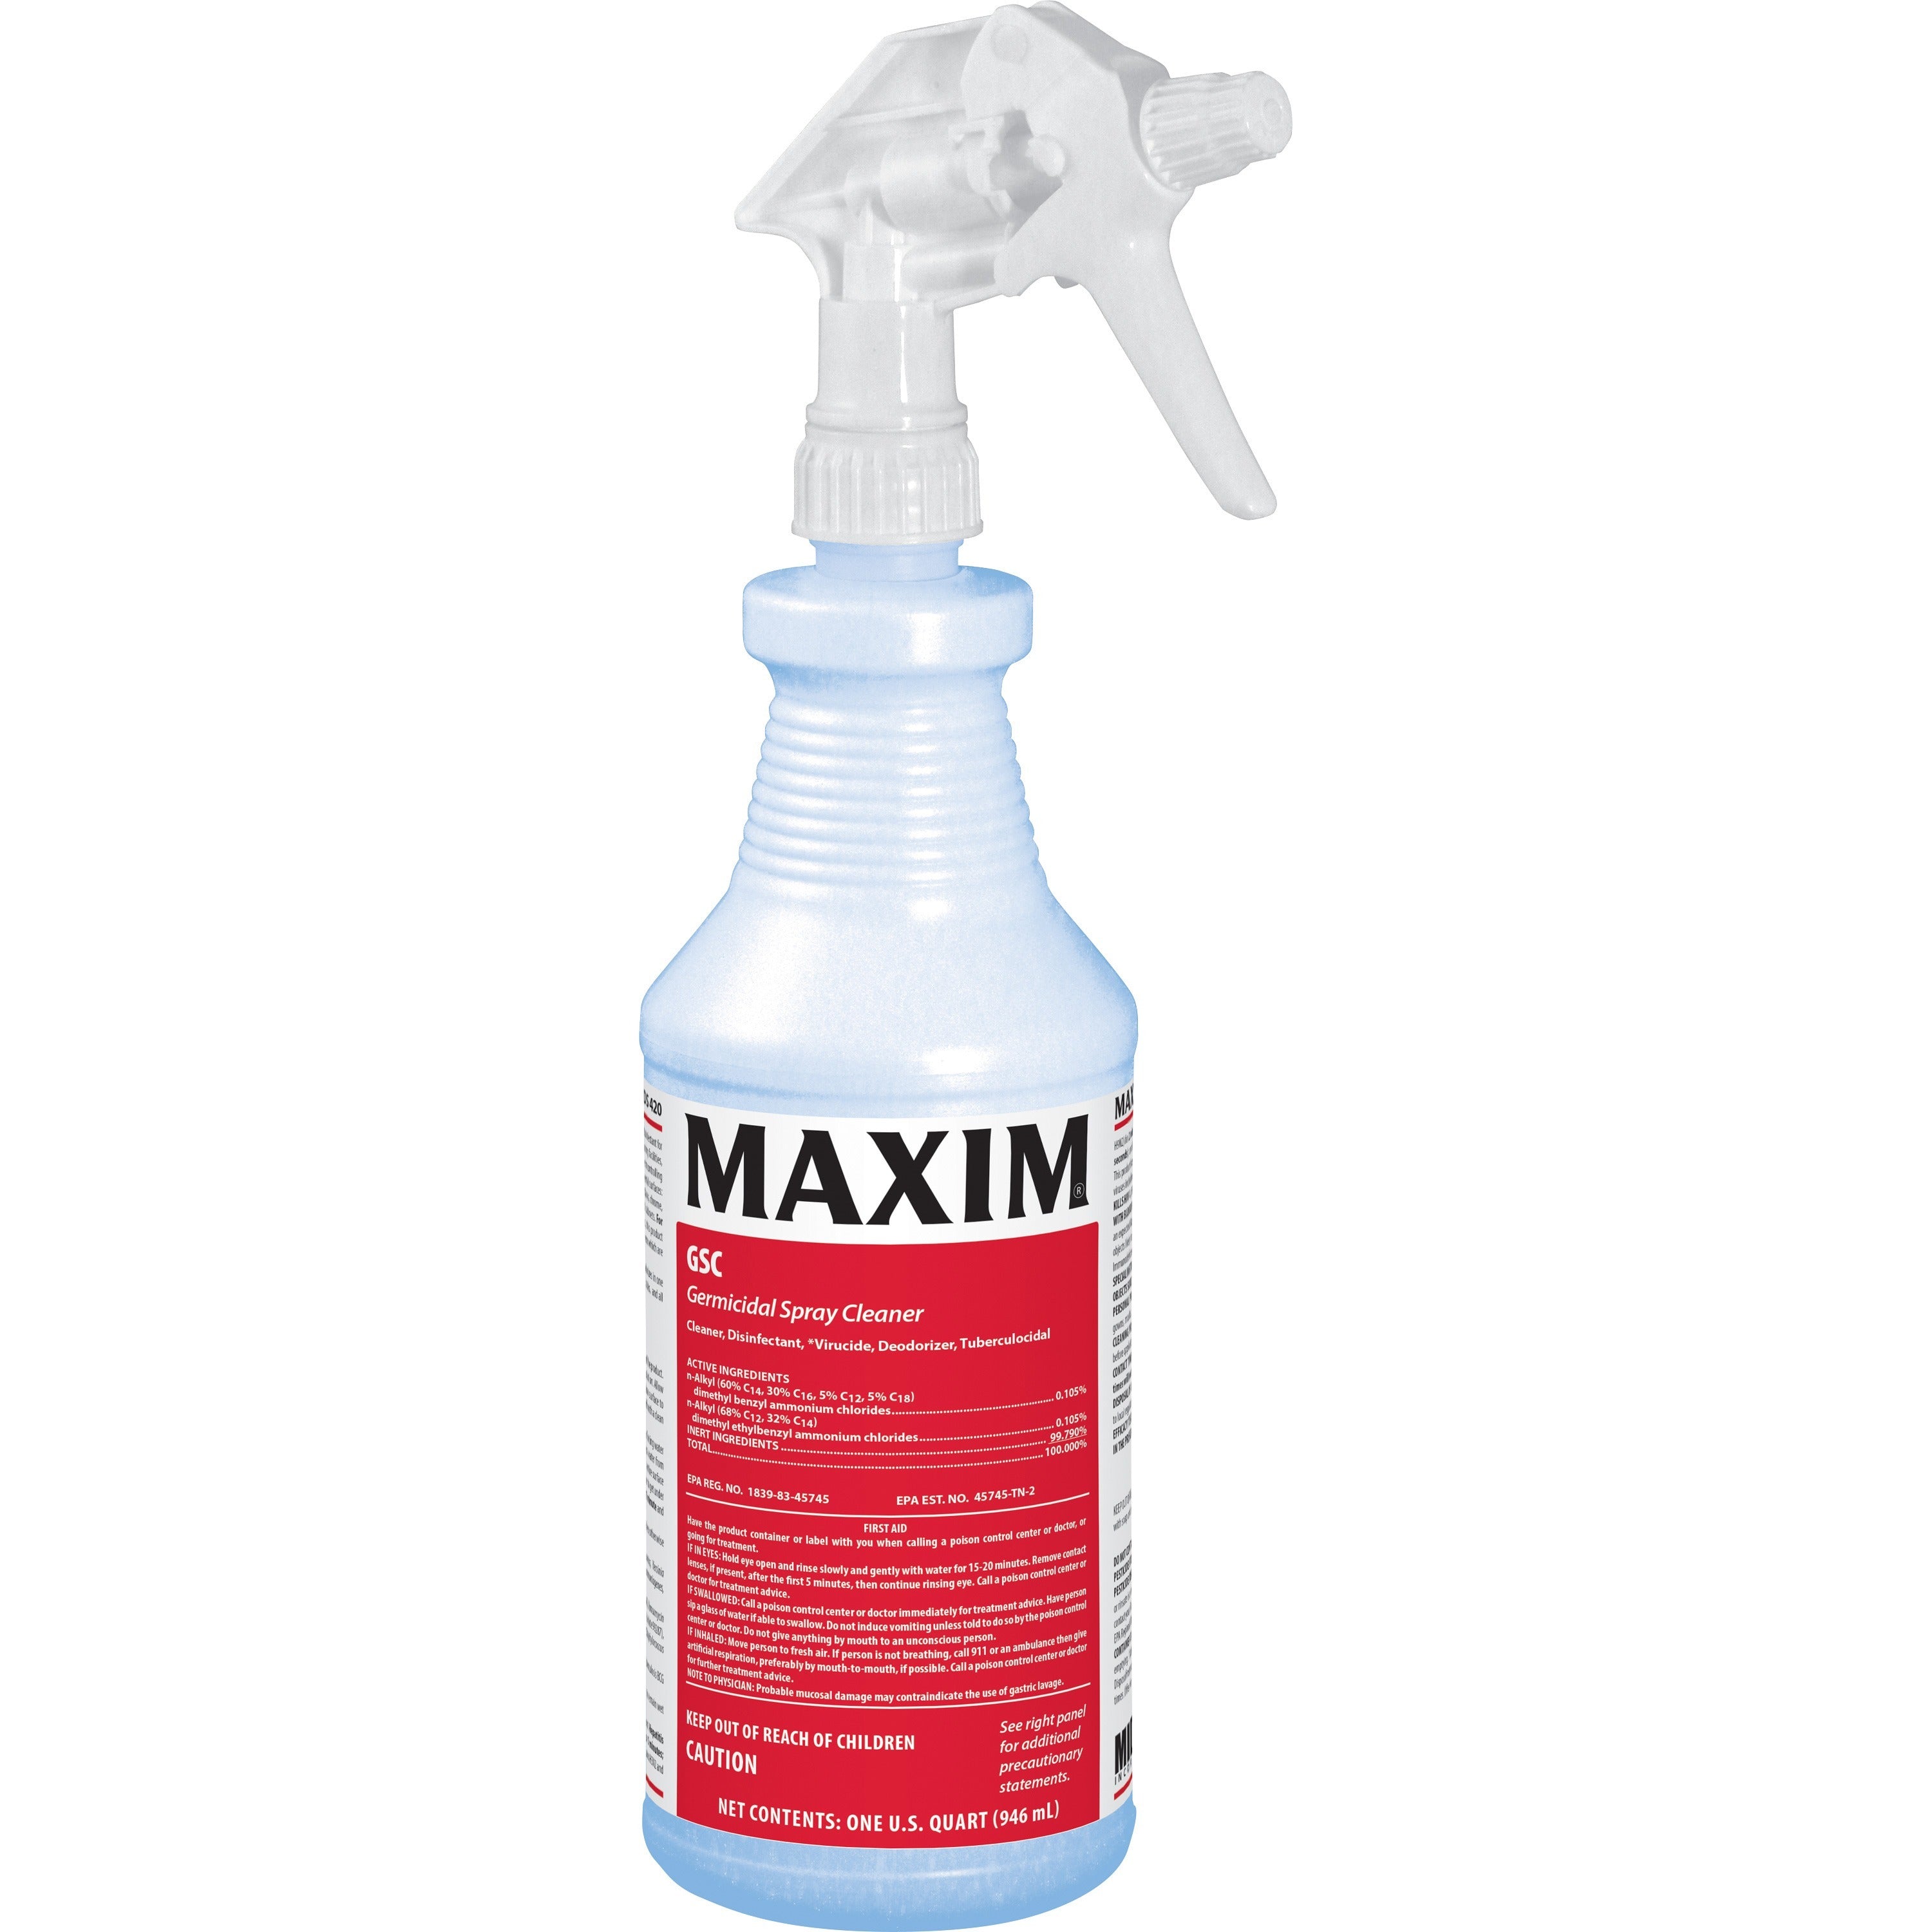 maxim-germicidal-spray-cleaner-ready-to-use-32-fl-oz-1-quart-lemon-scent-12-carton-non-abrasive-disinfectant-easy-to-use-clear_mlb04200012 - 1